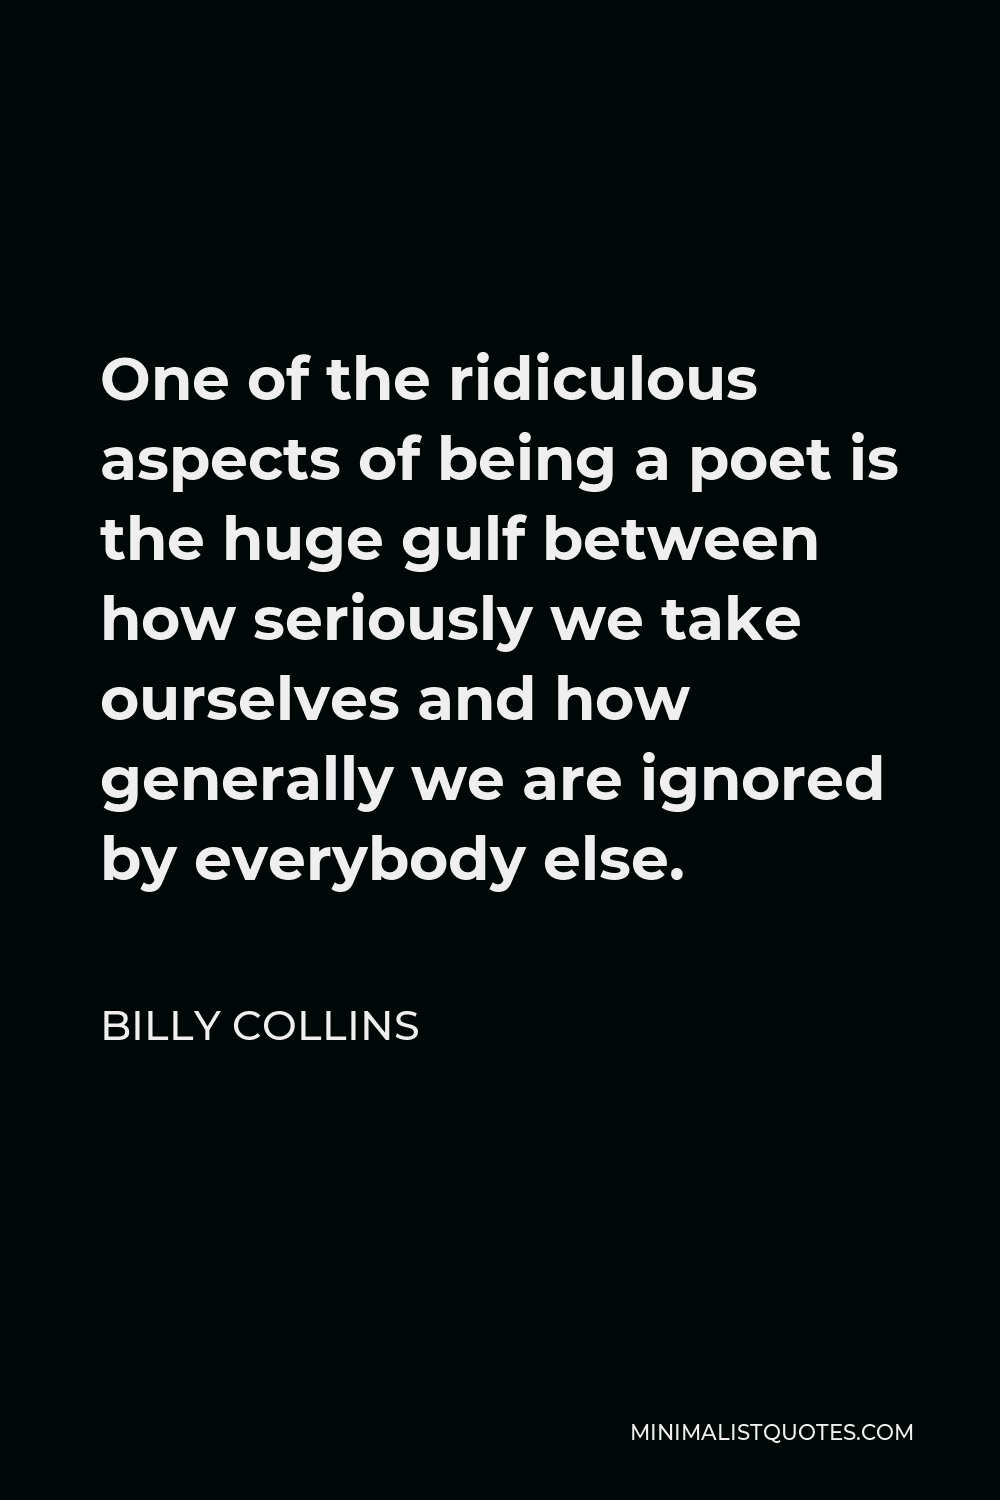 Billy Collins Quote - One of the ridiculous aspects of being a poet is the huge gulf between how seriously we take ourselves and how generally we are ignored by everybody else.